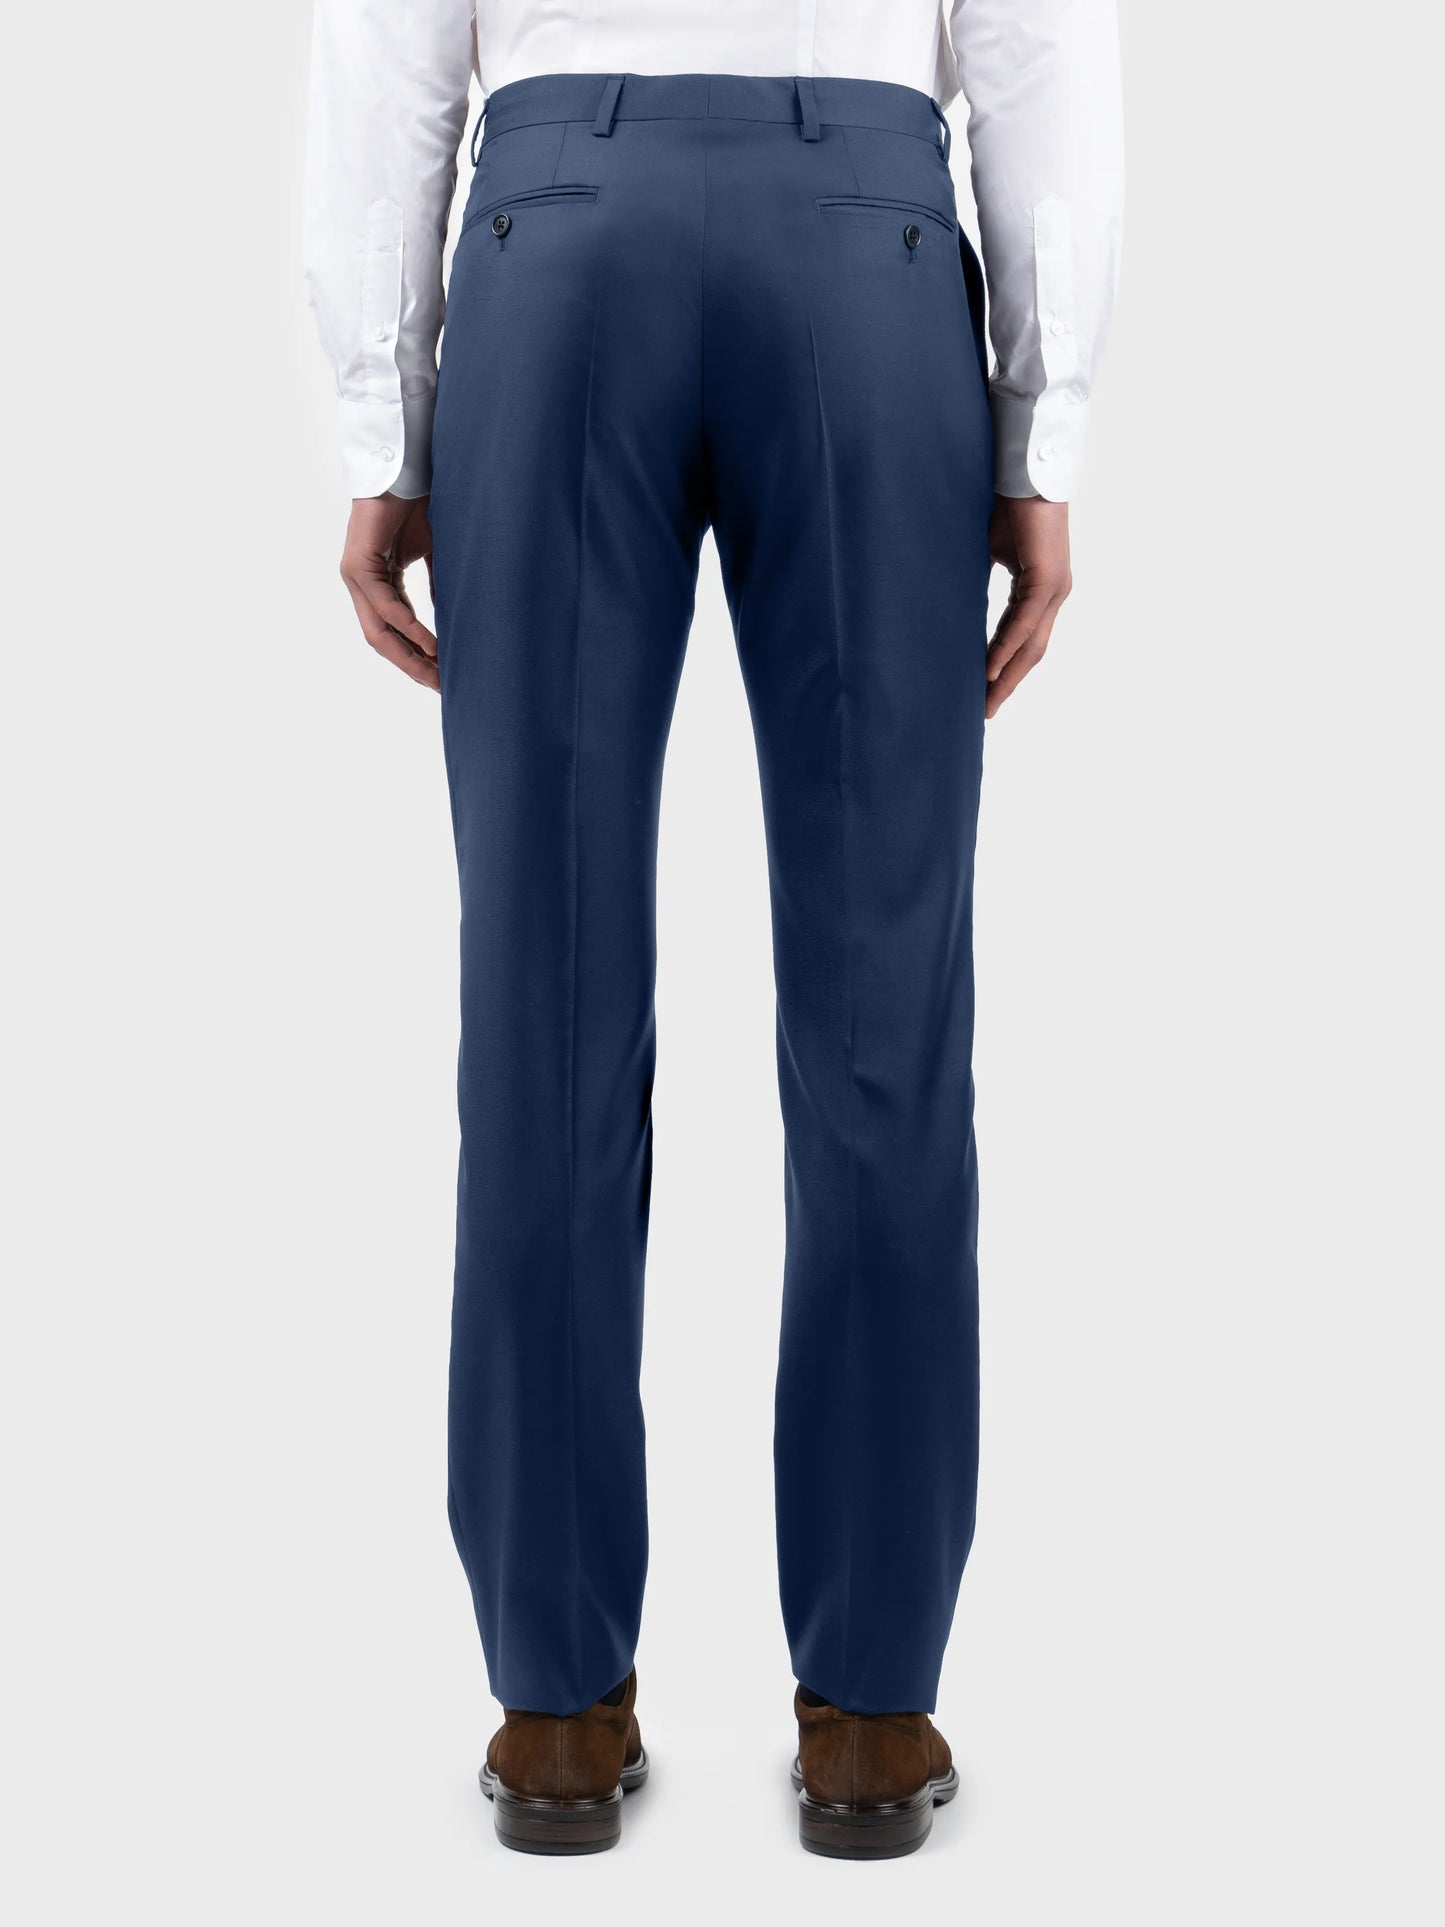 Police Trousers